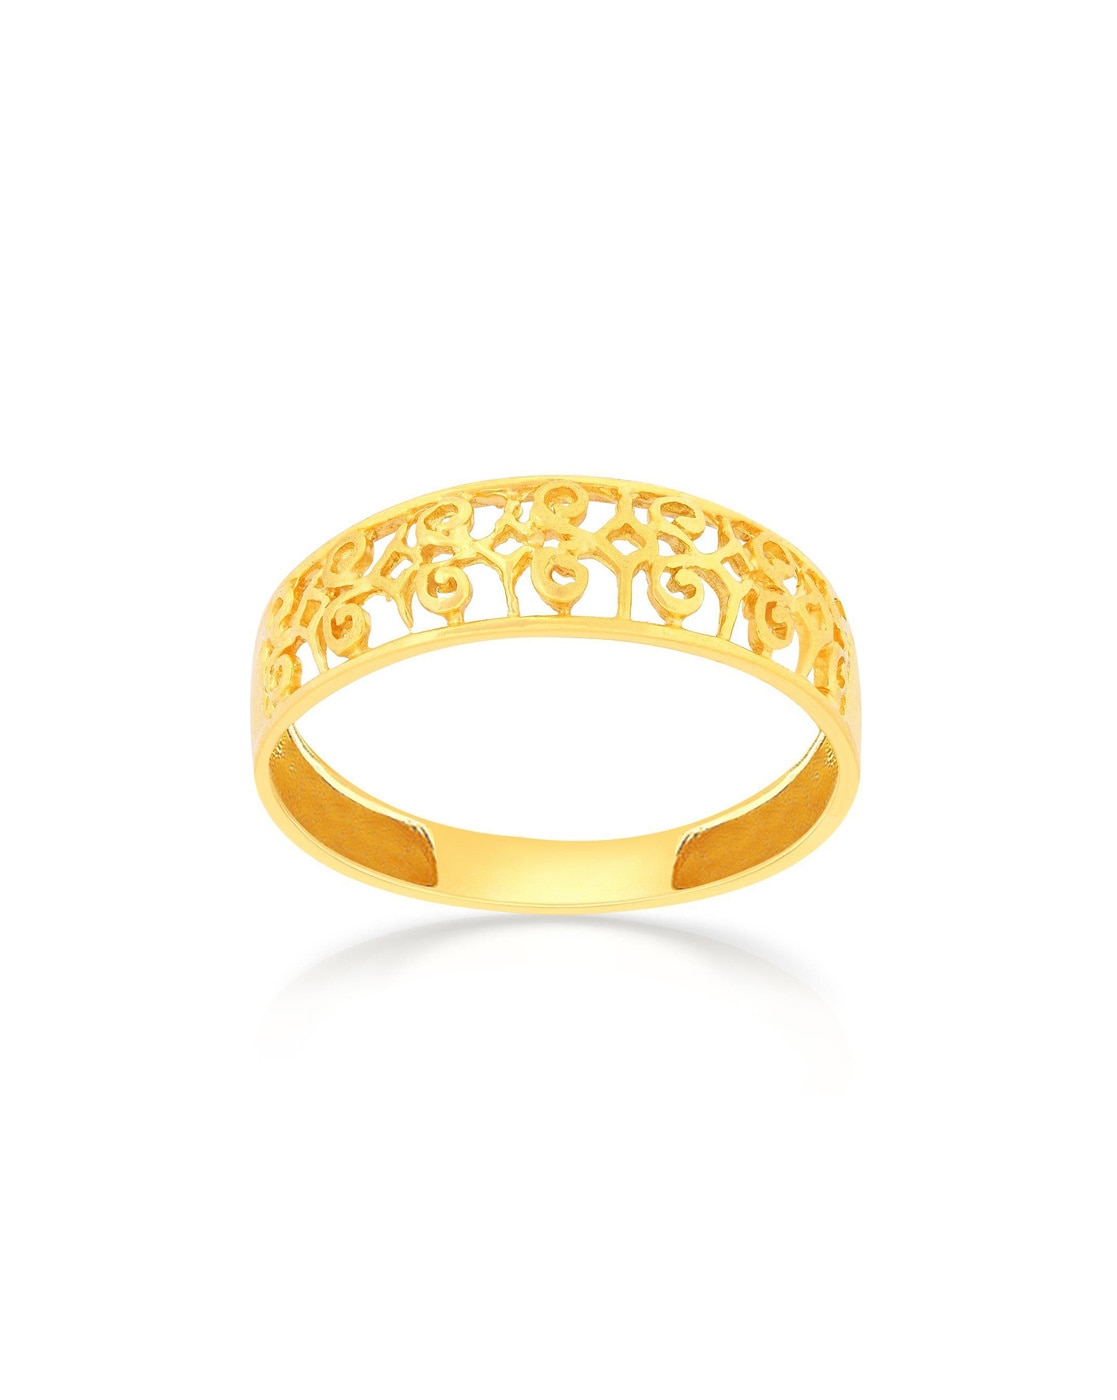 Buy Malabar Gold 22 KT Gold Casual Ring for Women Online